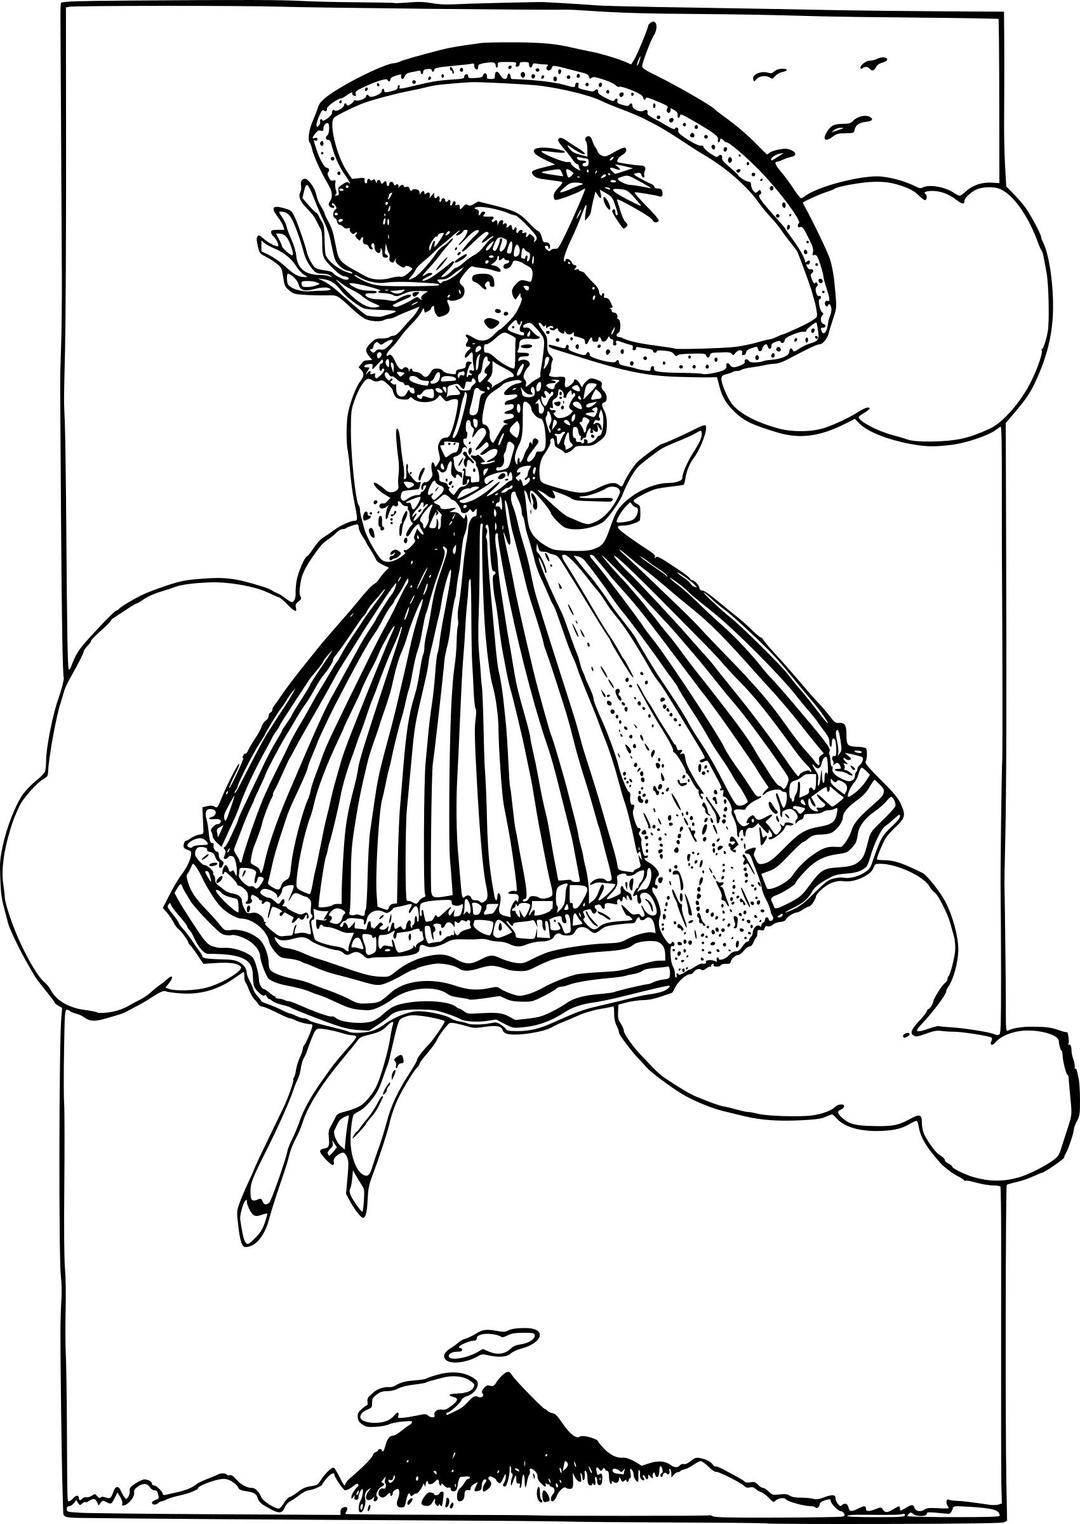 Woman in the Clouds png transparent